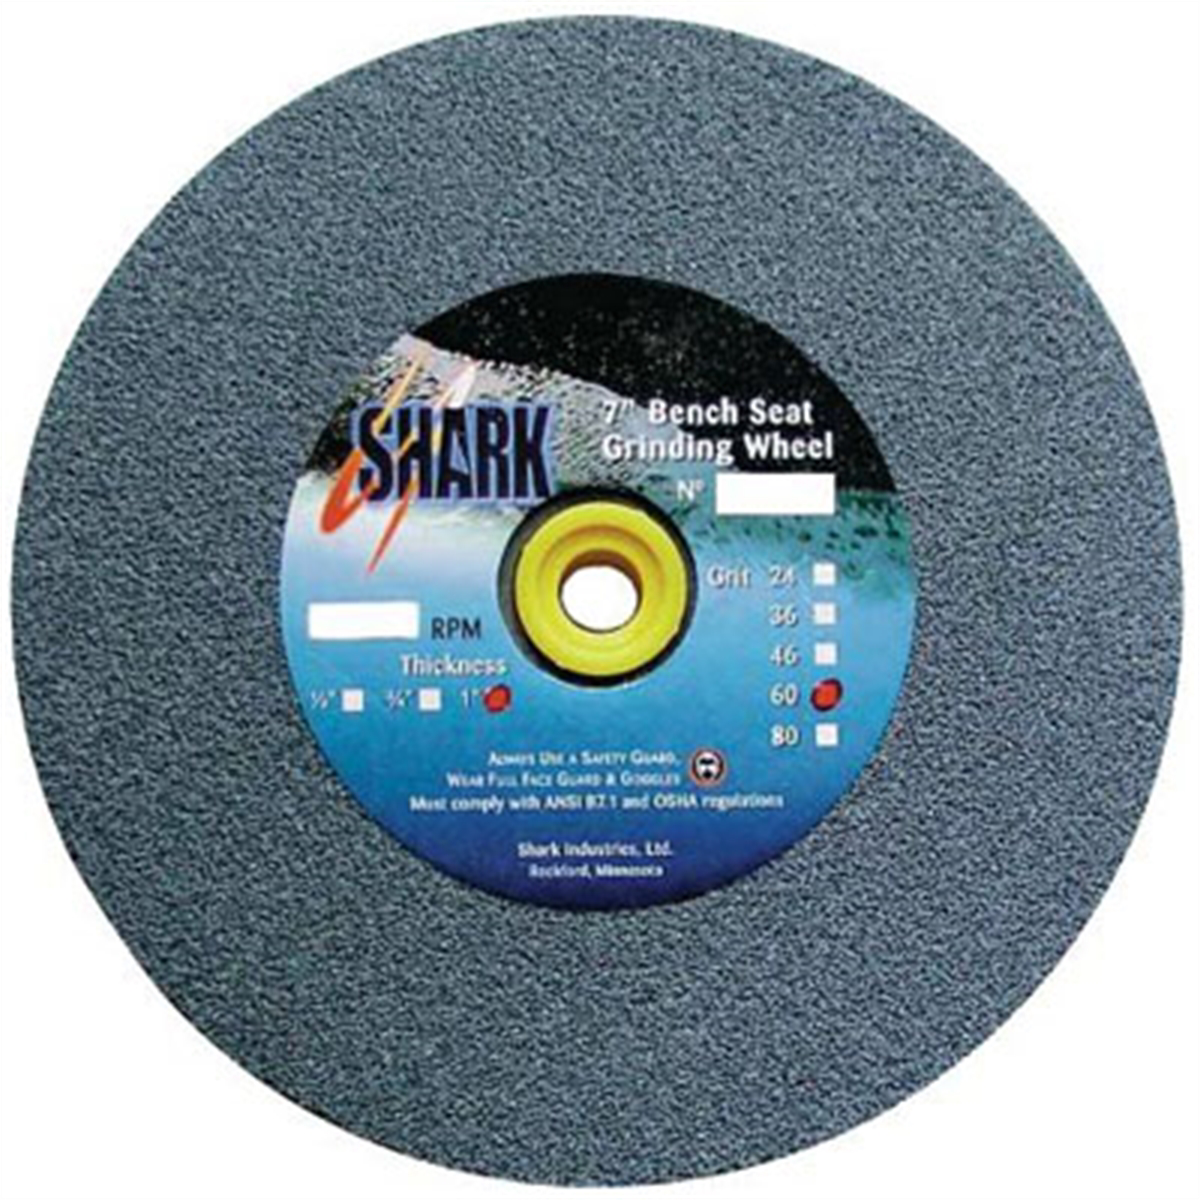 Bench Seat Grinding Wheel Size 8" x 3/4" - 46 Grit Made of Alum